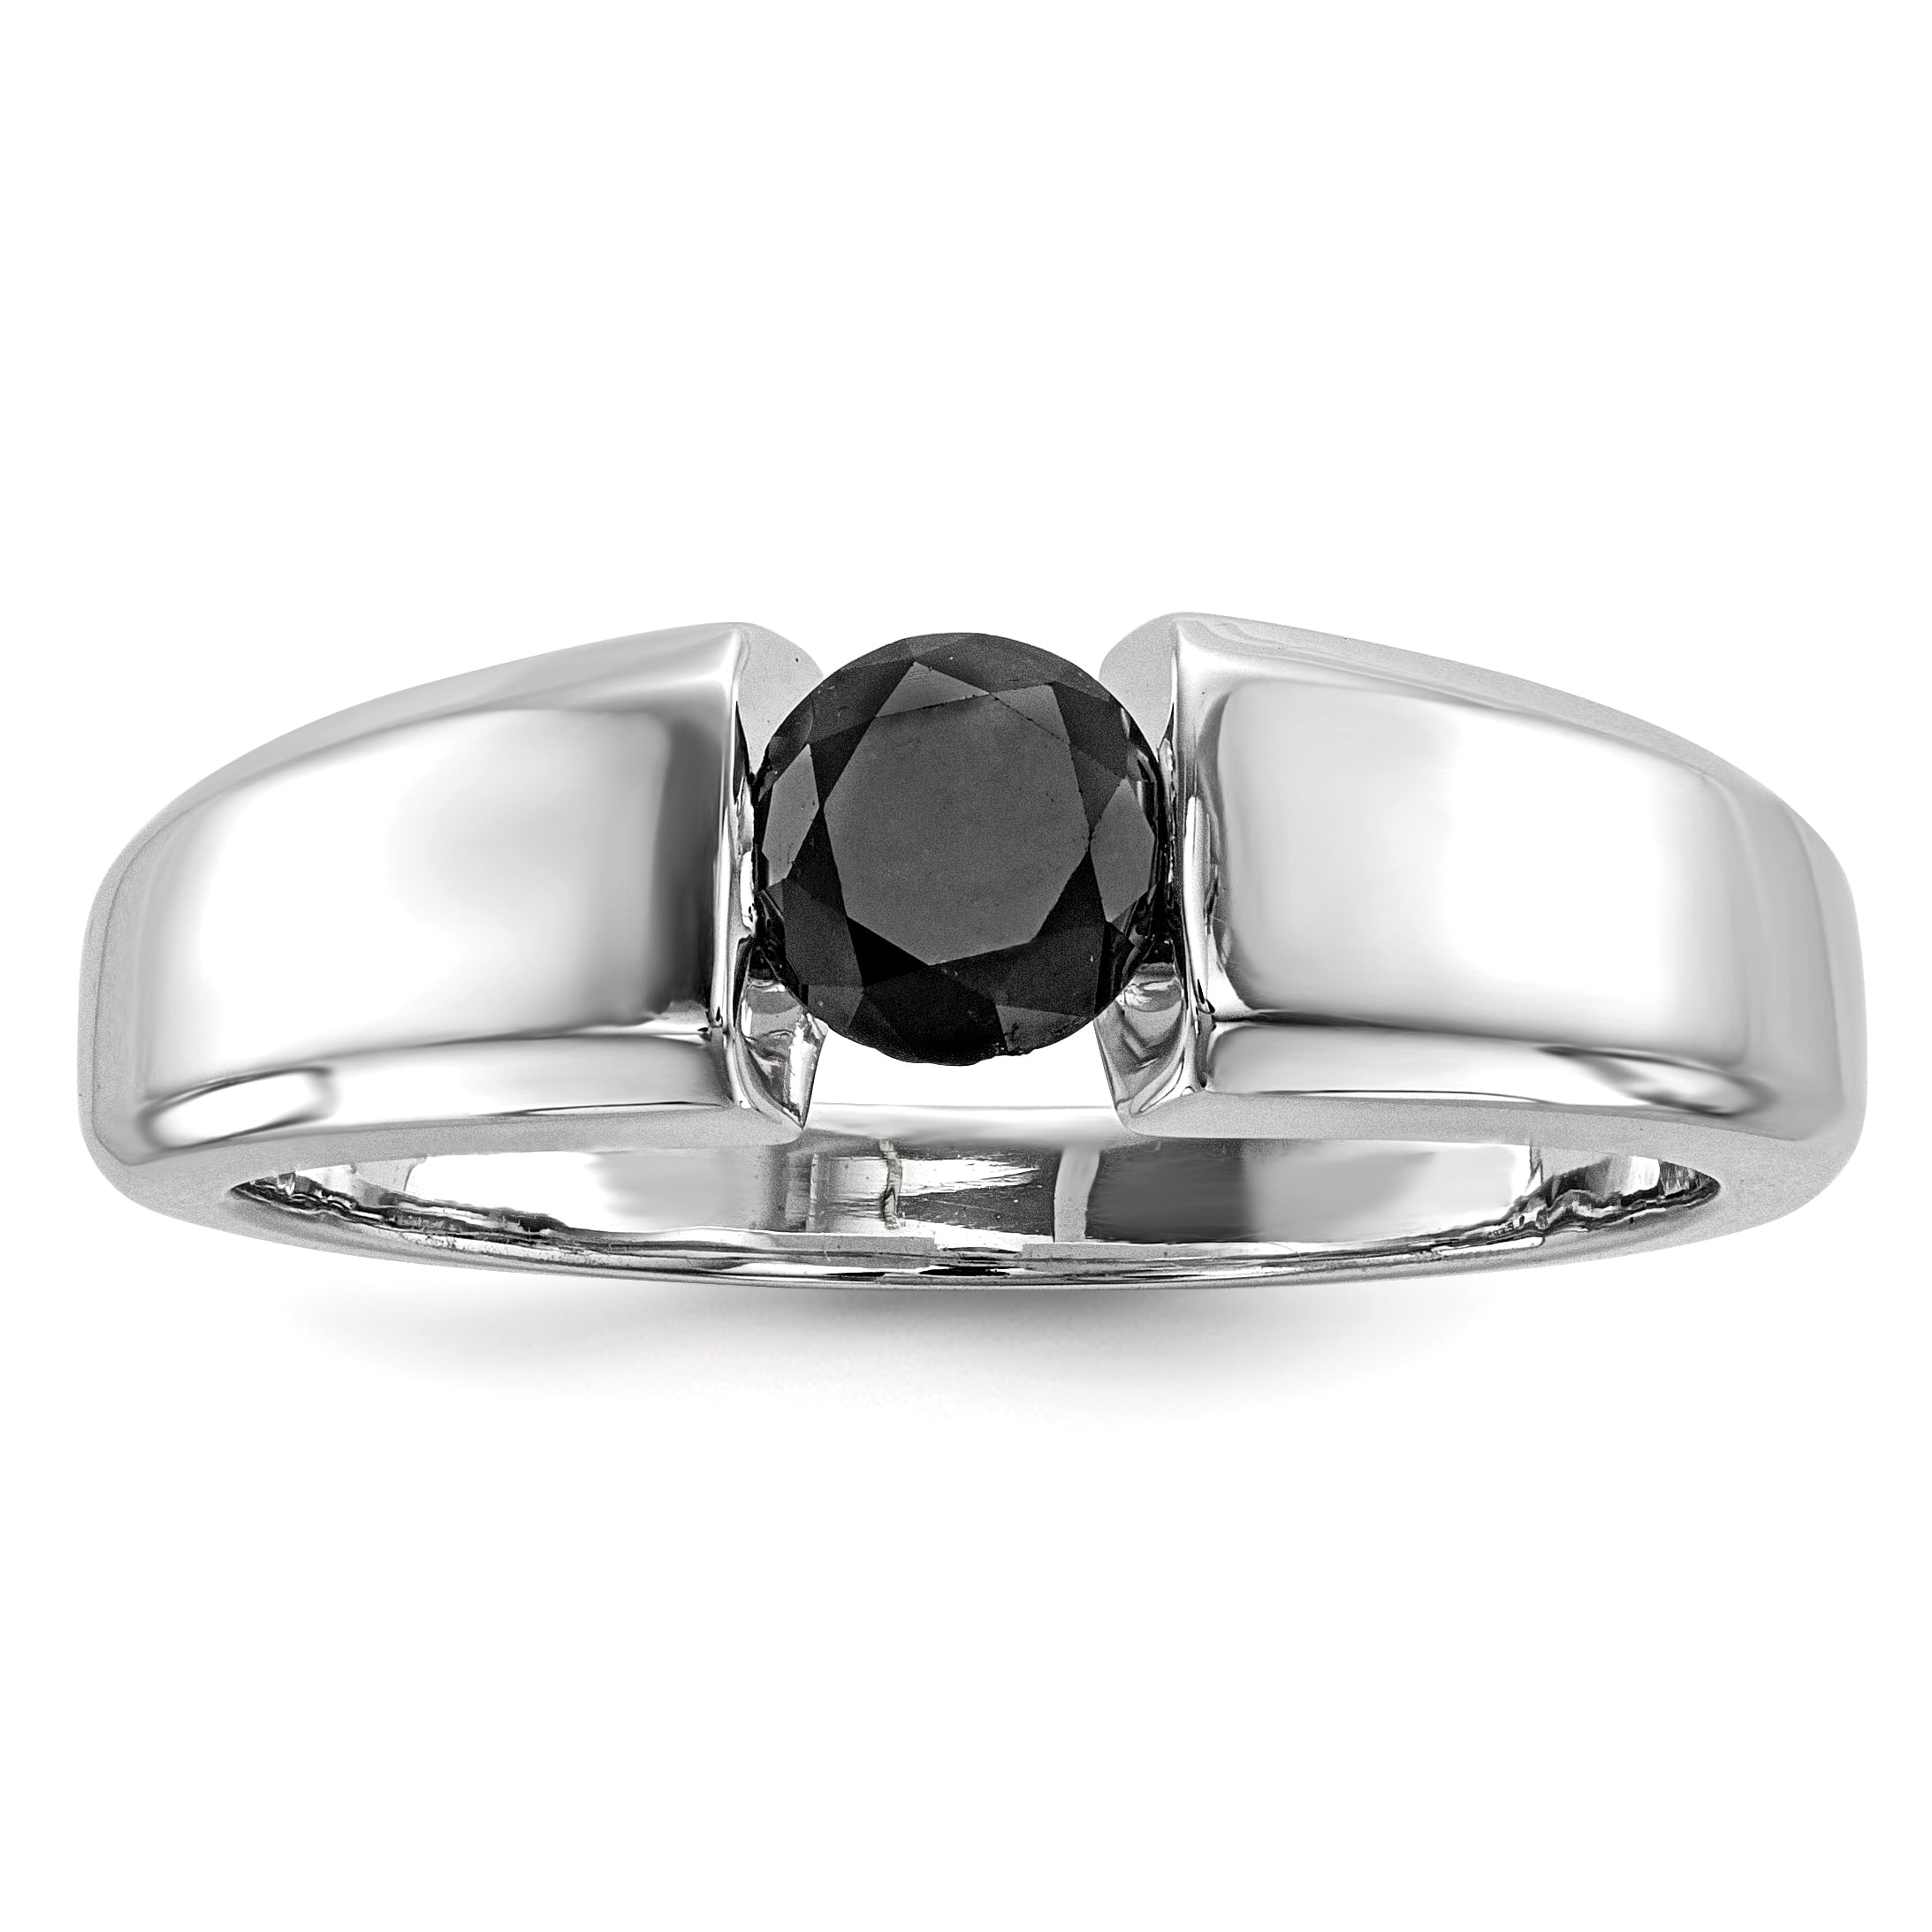 SVC-JEWELS 14k Black Gold Plated Round Cut Created Black Diamond Mens 5-Stone Wedding Band Anniversary Ring 925 Sterling Silver 